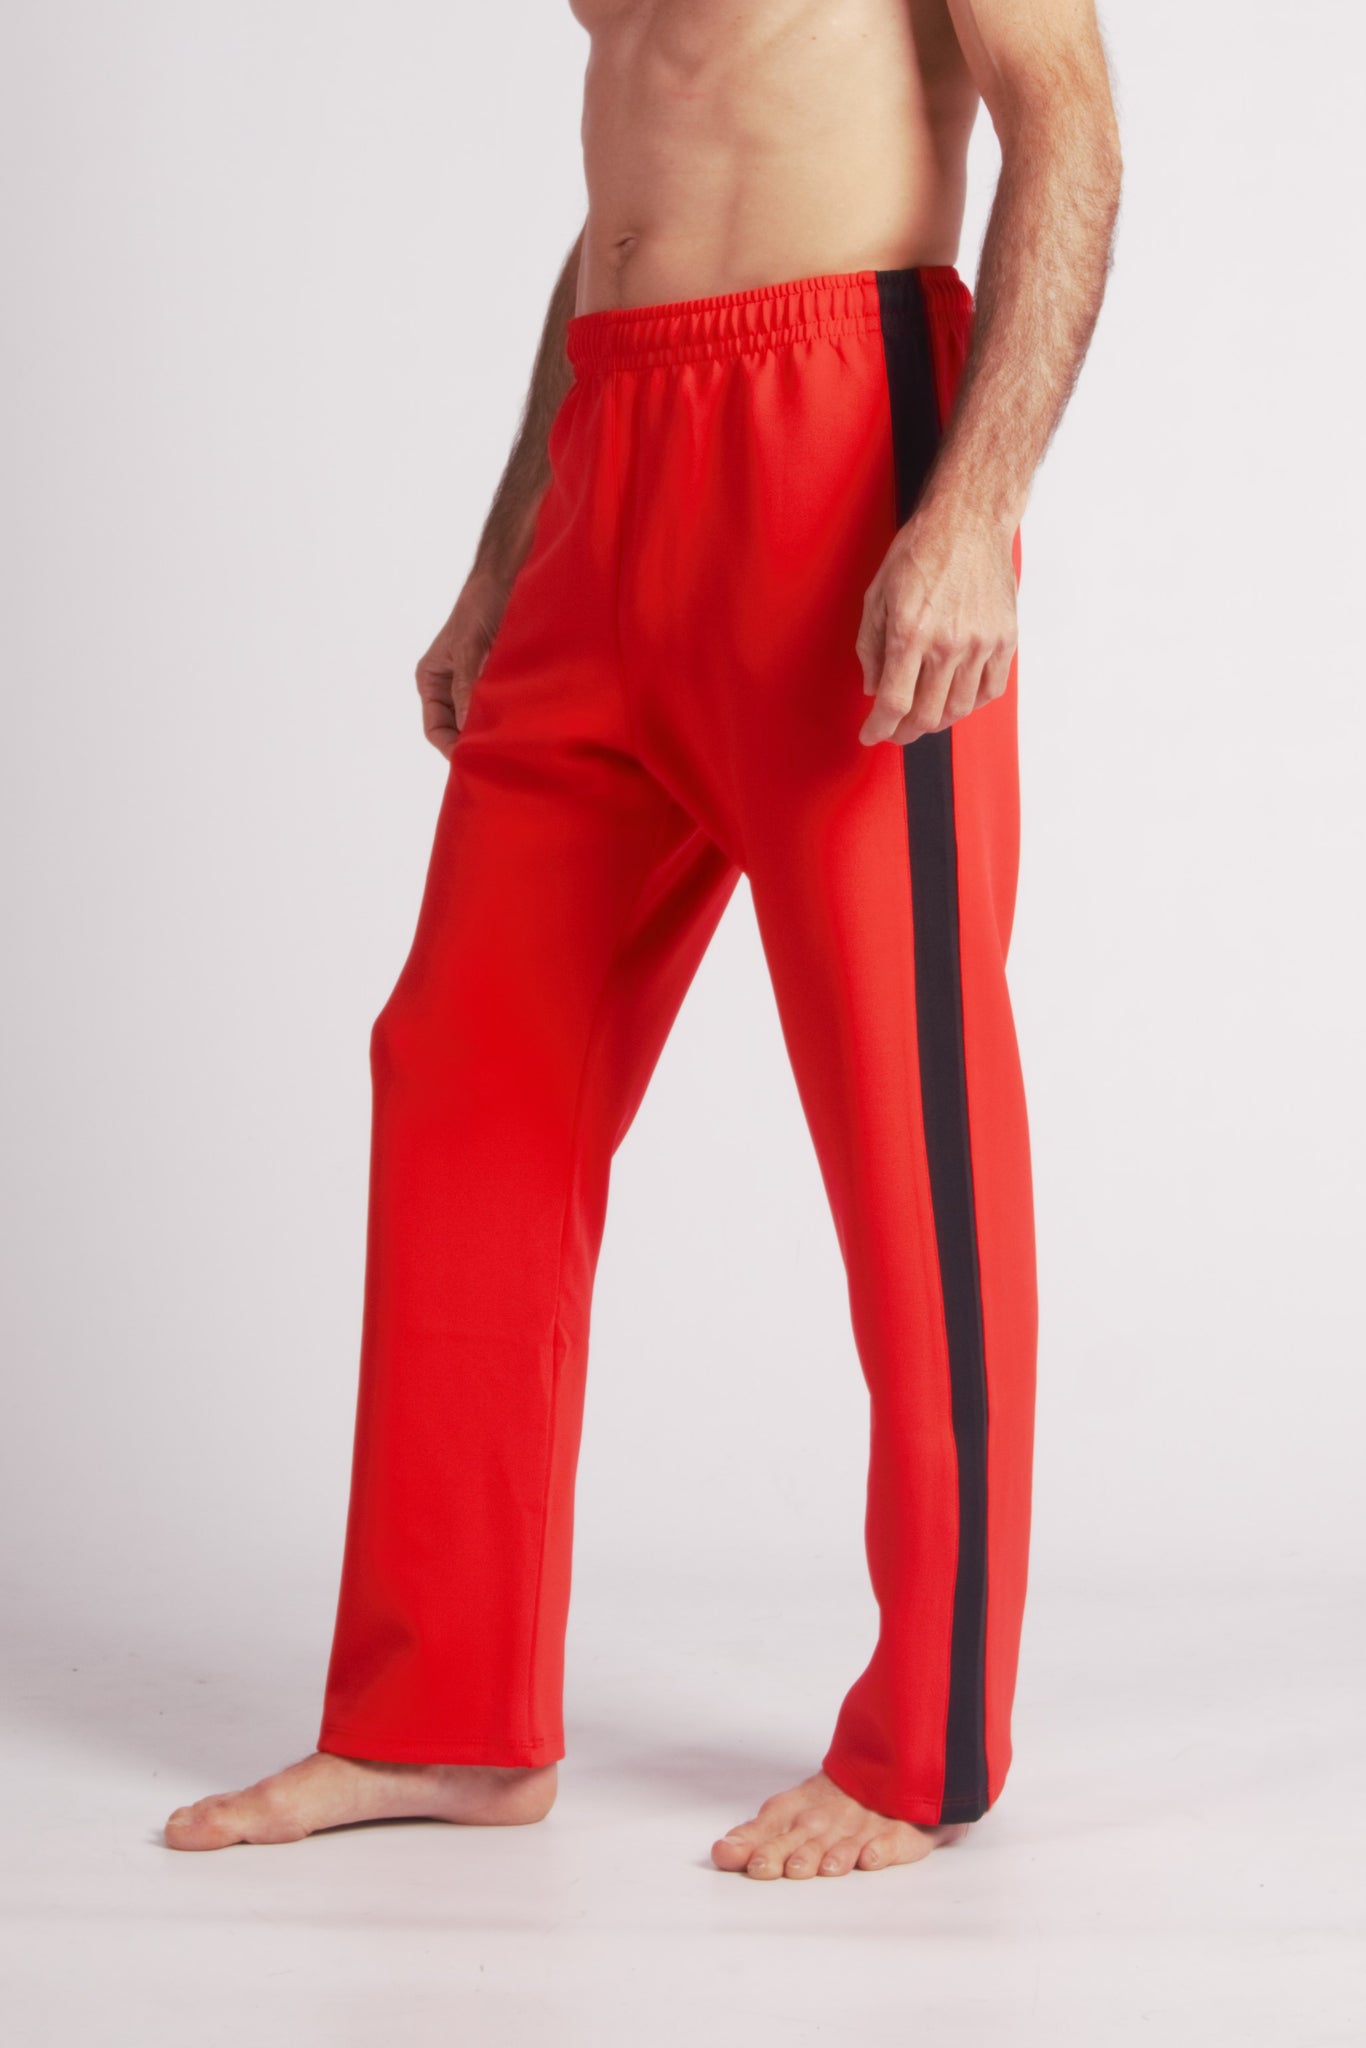 Flying Contemporary Dance Pants - Red & Black / EMotionBodiesBrand – E  Motion Bodies Brand